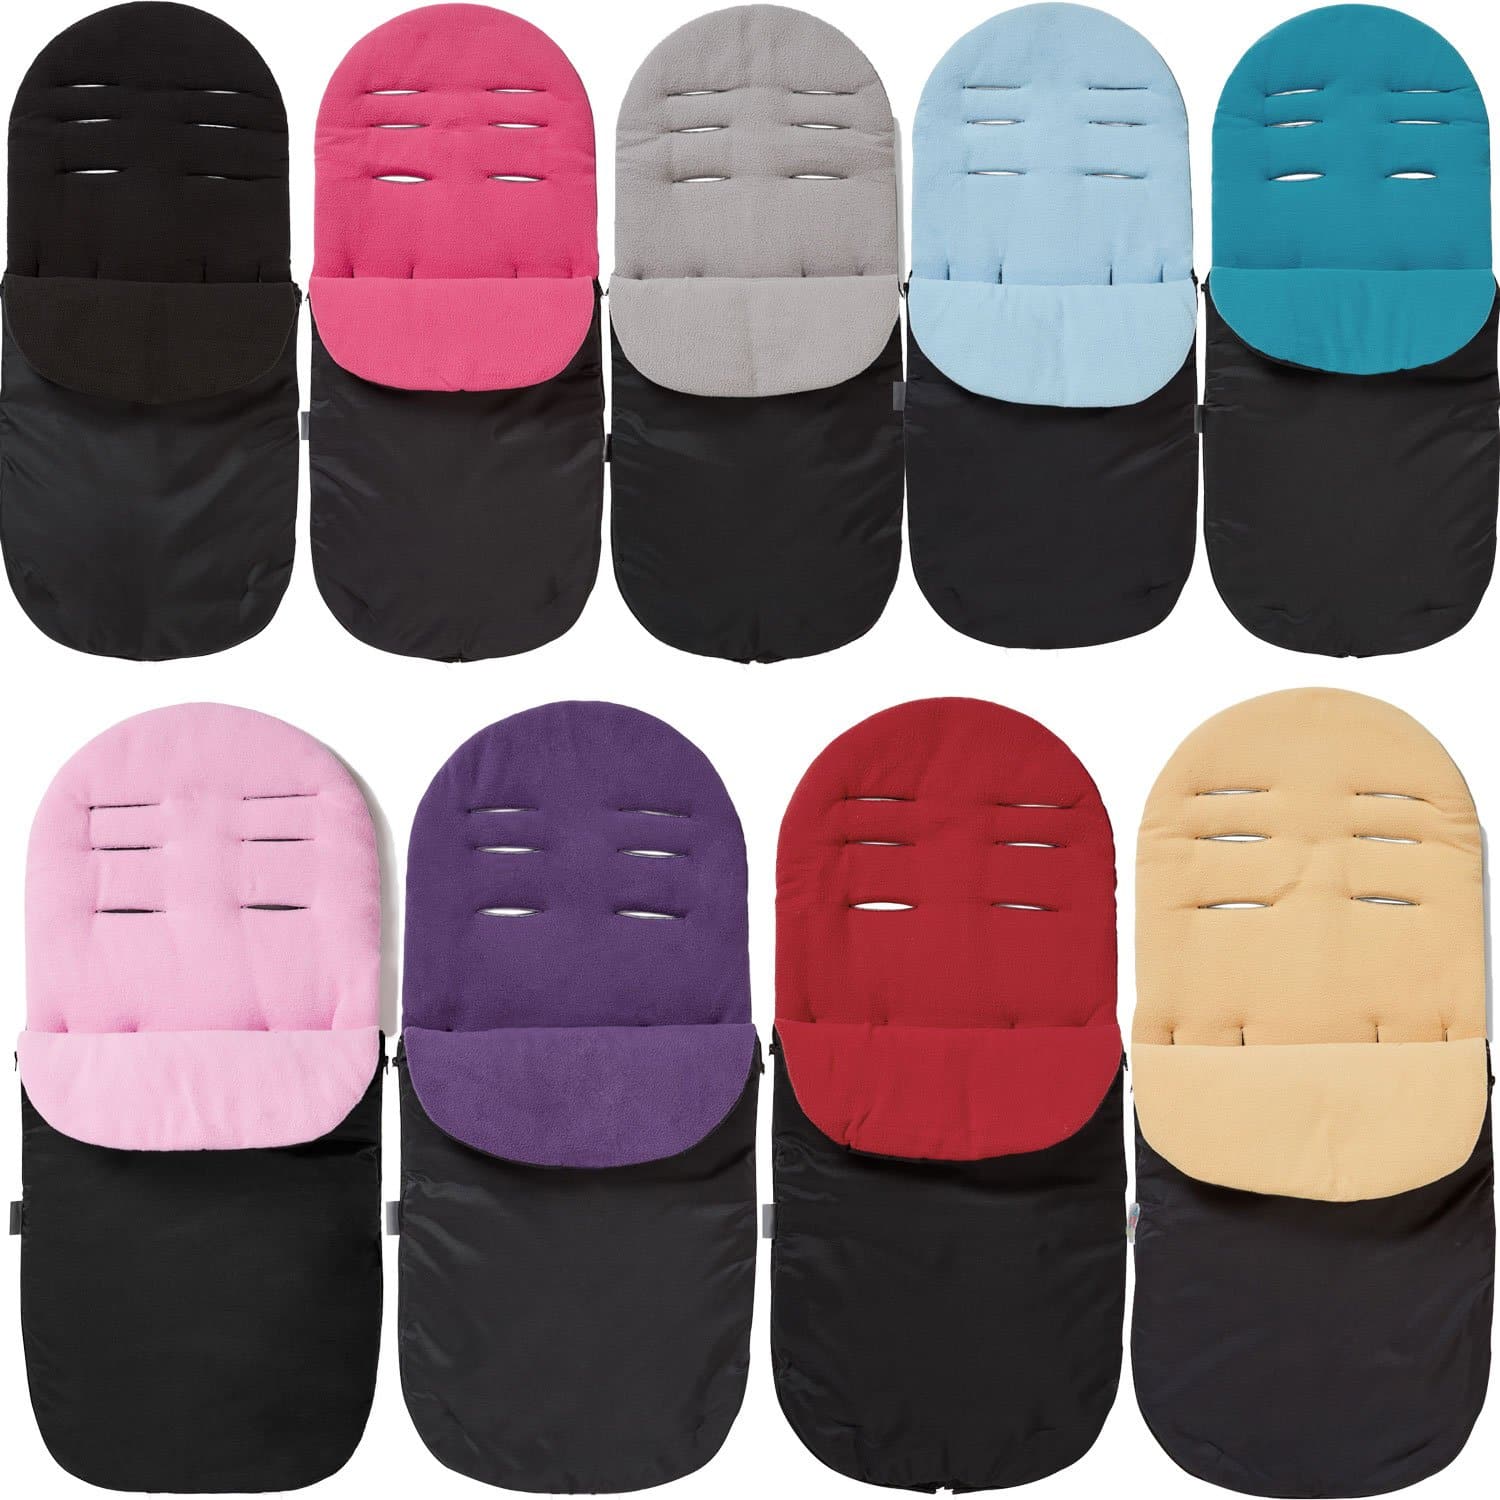 Footmuff / Cosy Toes Compatible with Zeta - For Your Little One